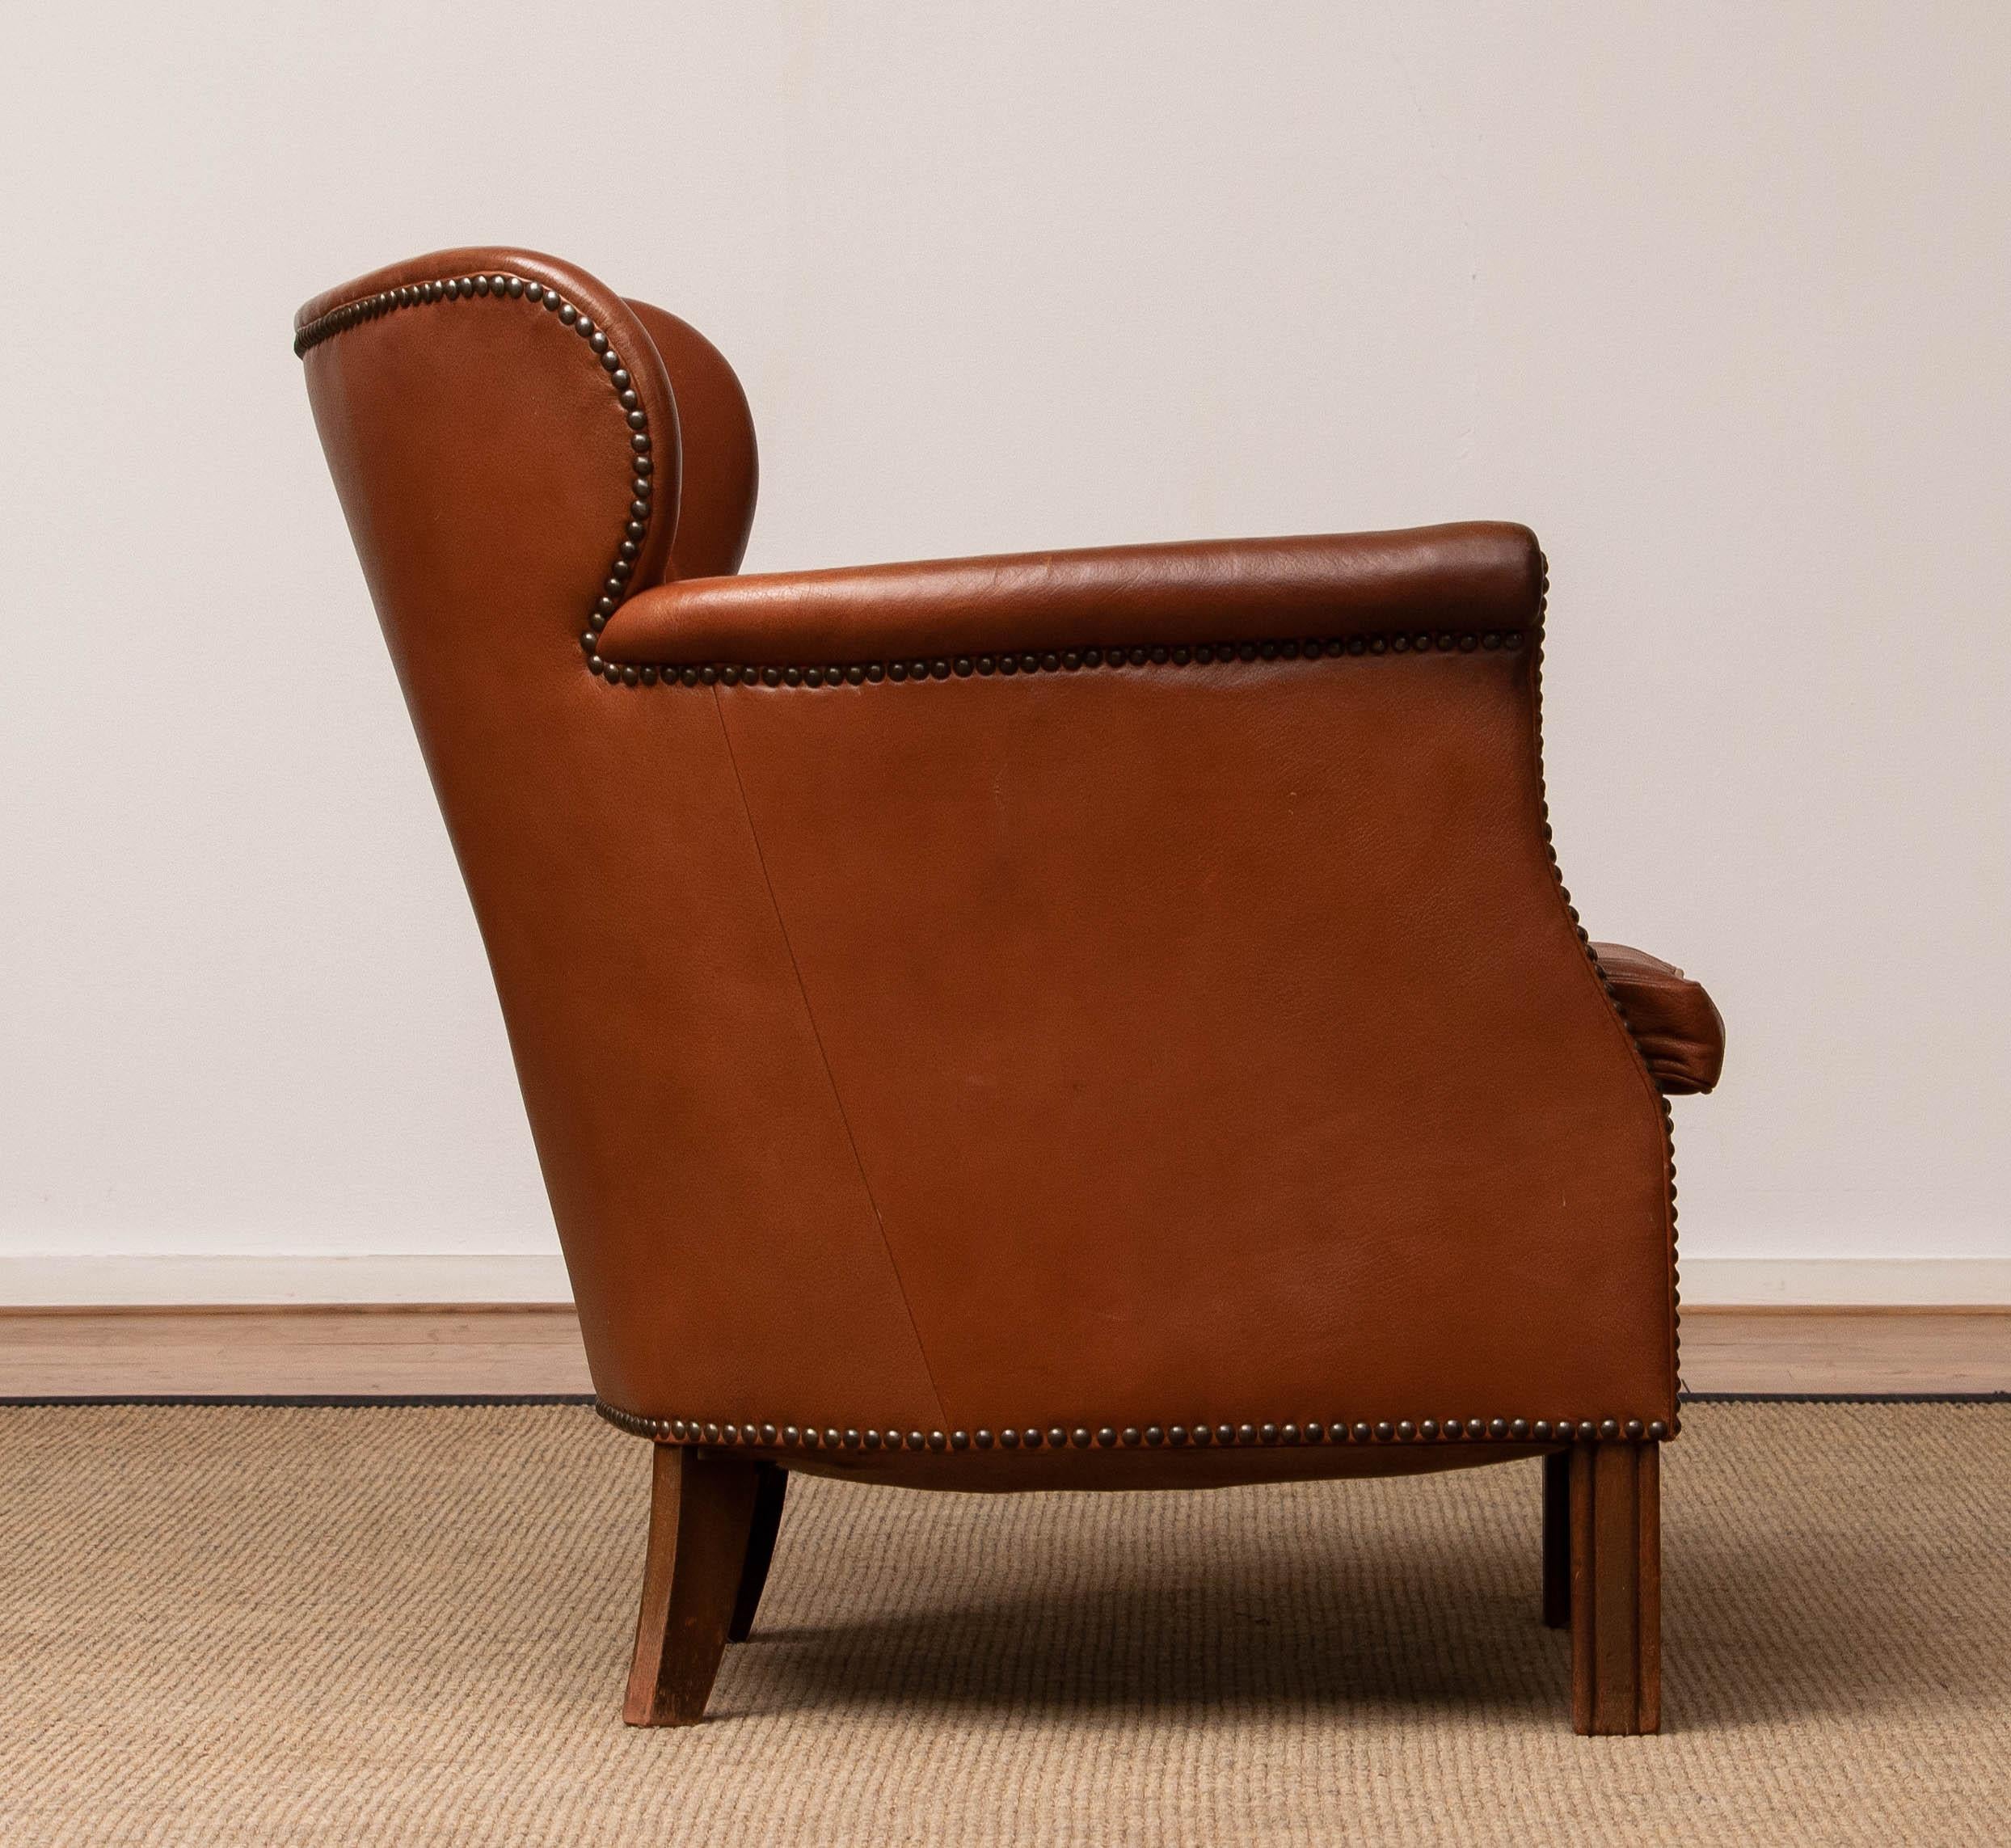 1940's Scandinavian Tan / Brown Nailed Leather Club / Cigar Chair from Denmark 2